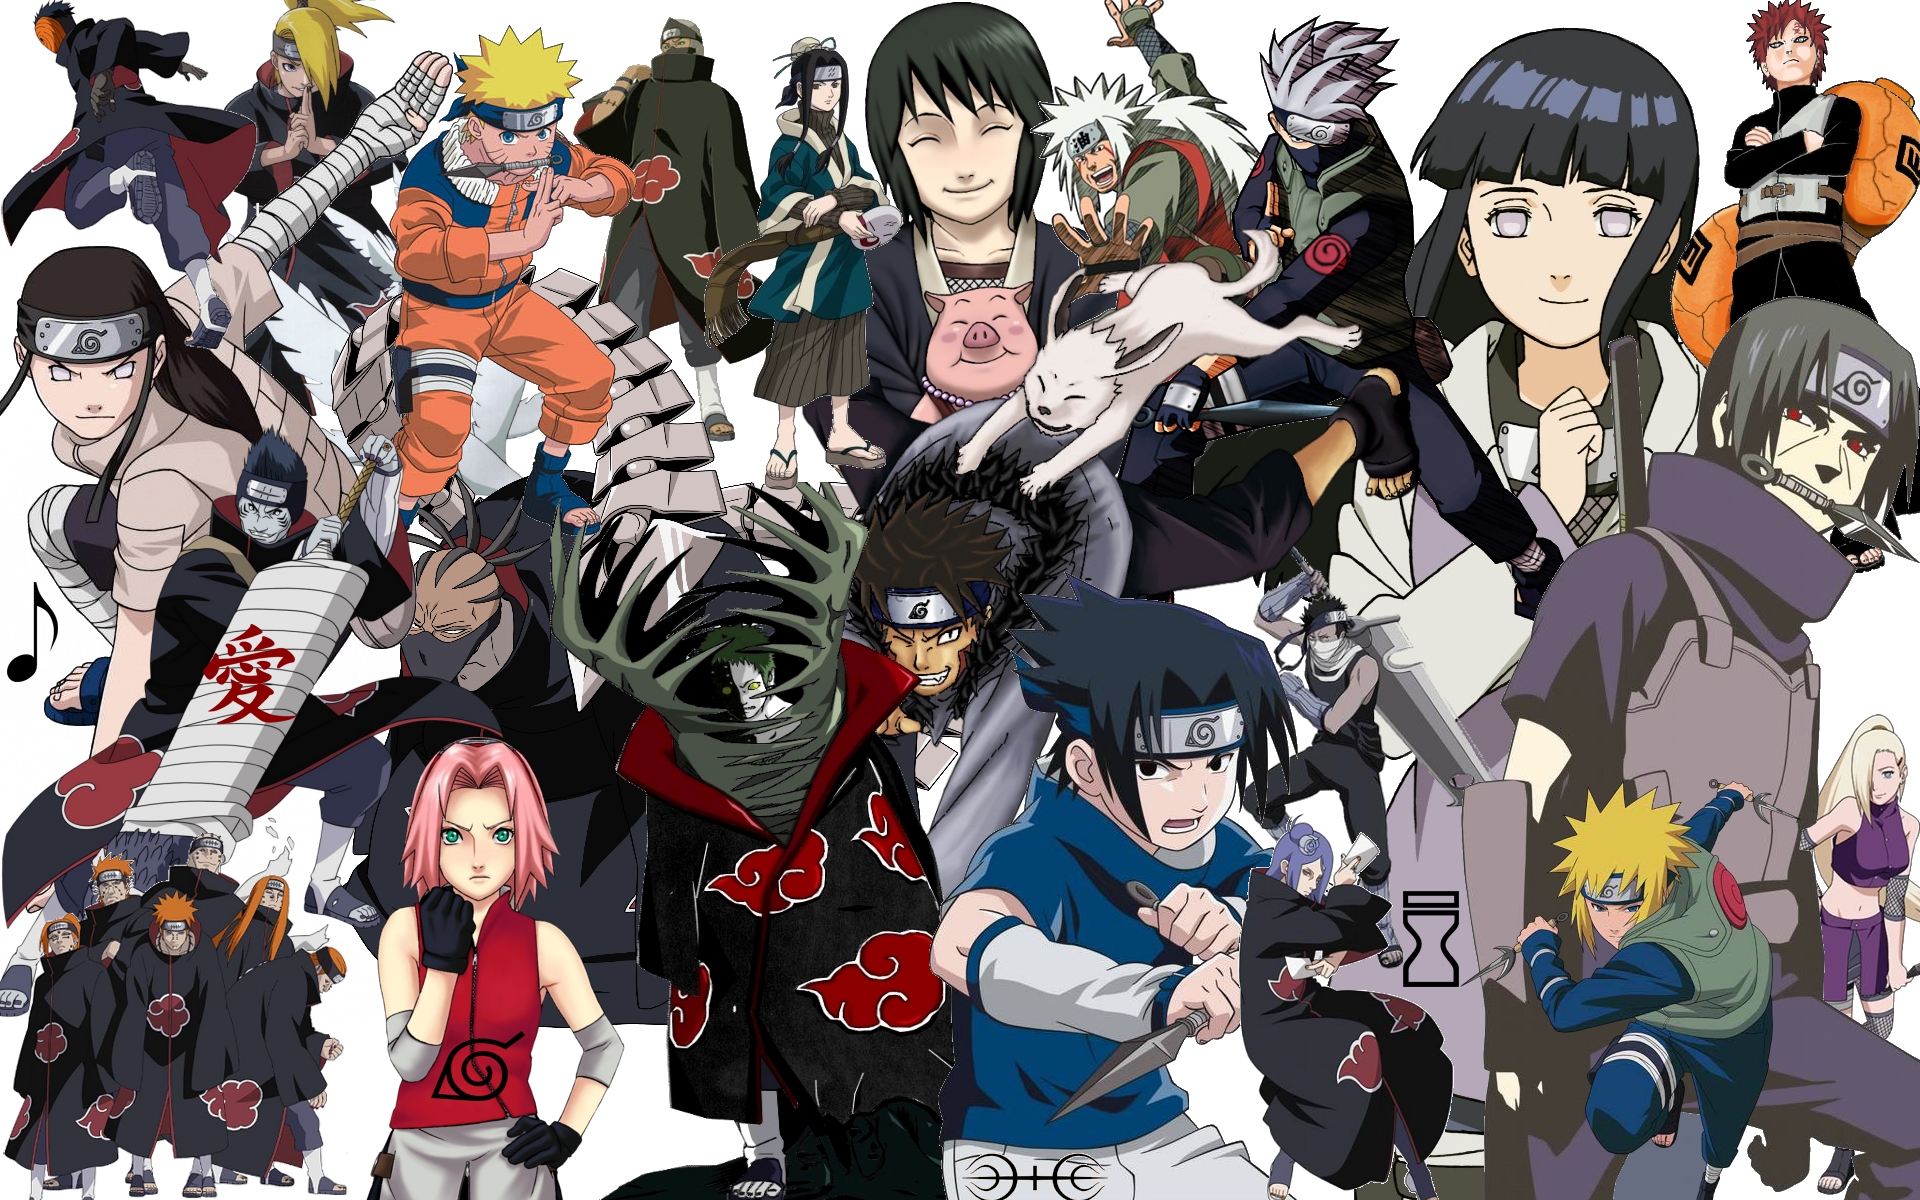 Naruto Collage Wallpaper by superzproductions on DeviantArt